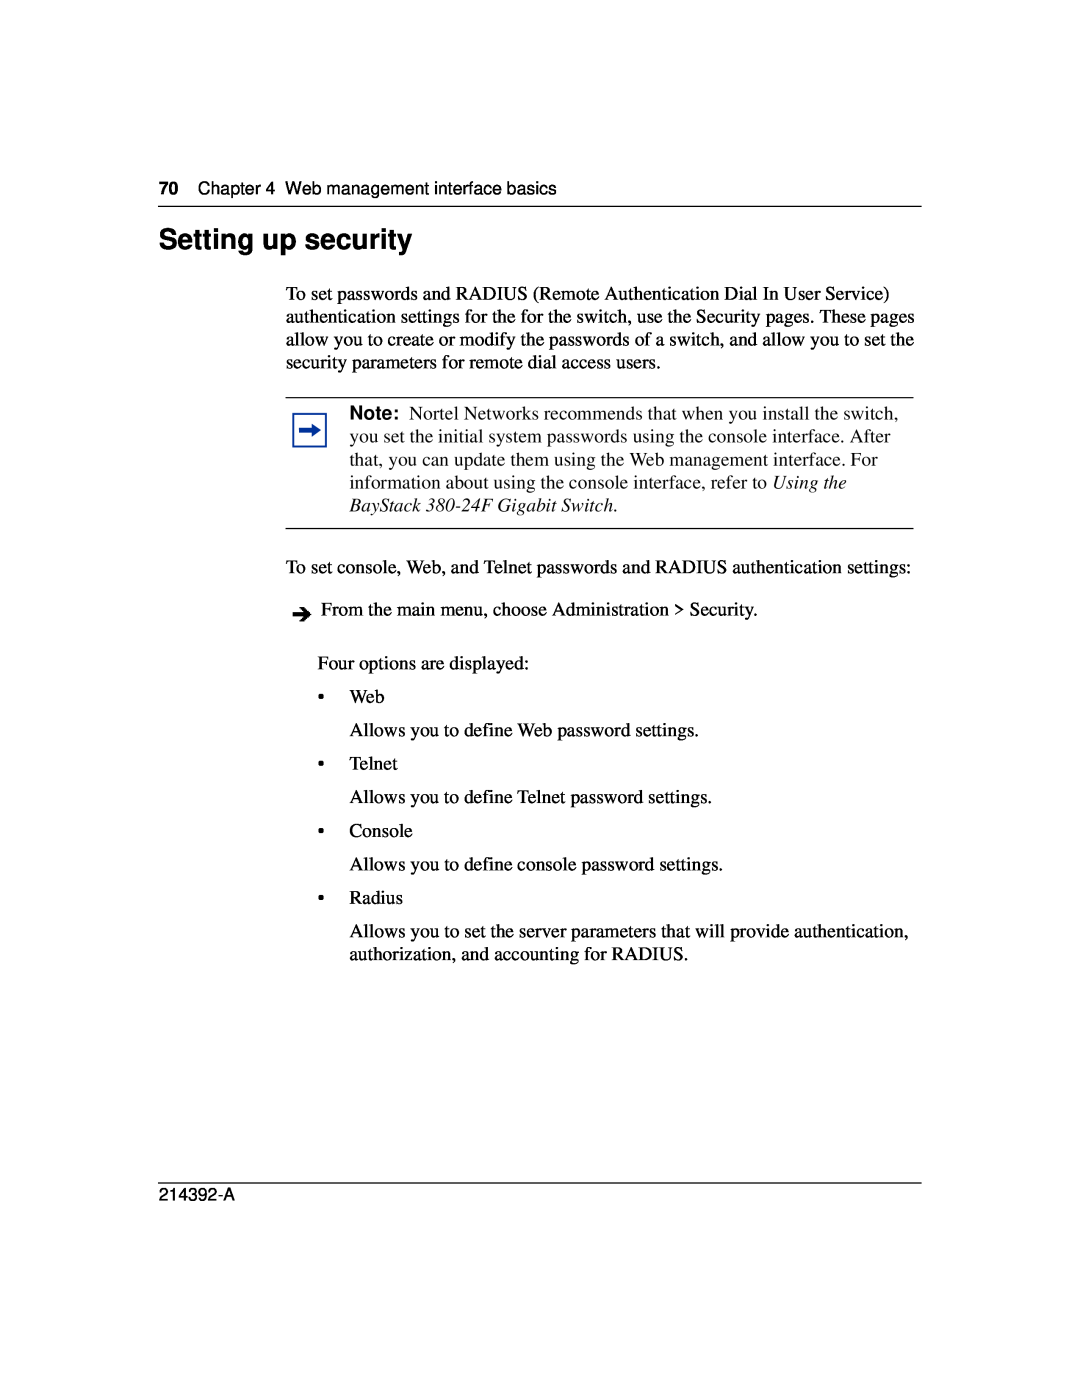 Nortel Networks 380-24F manual Setting up security 